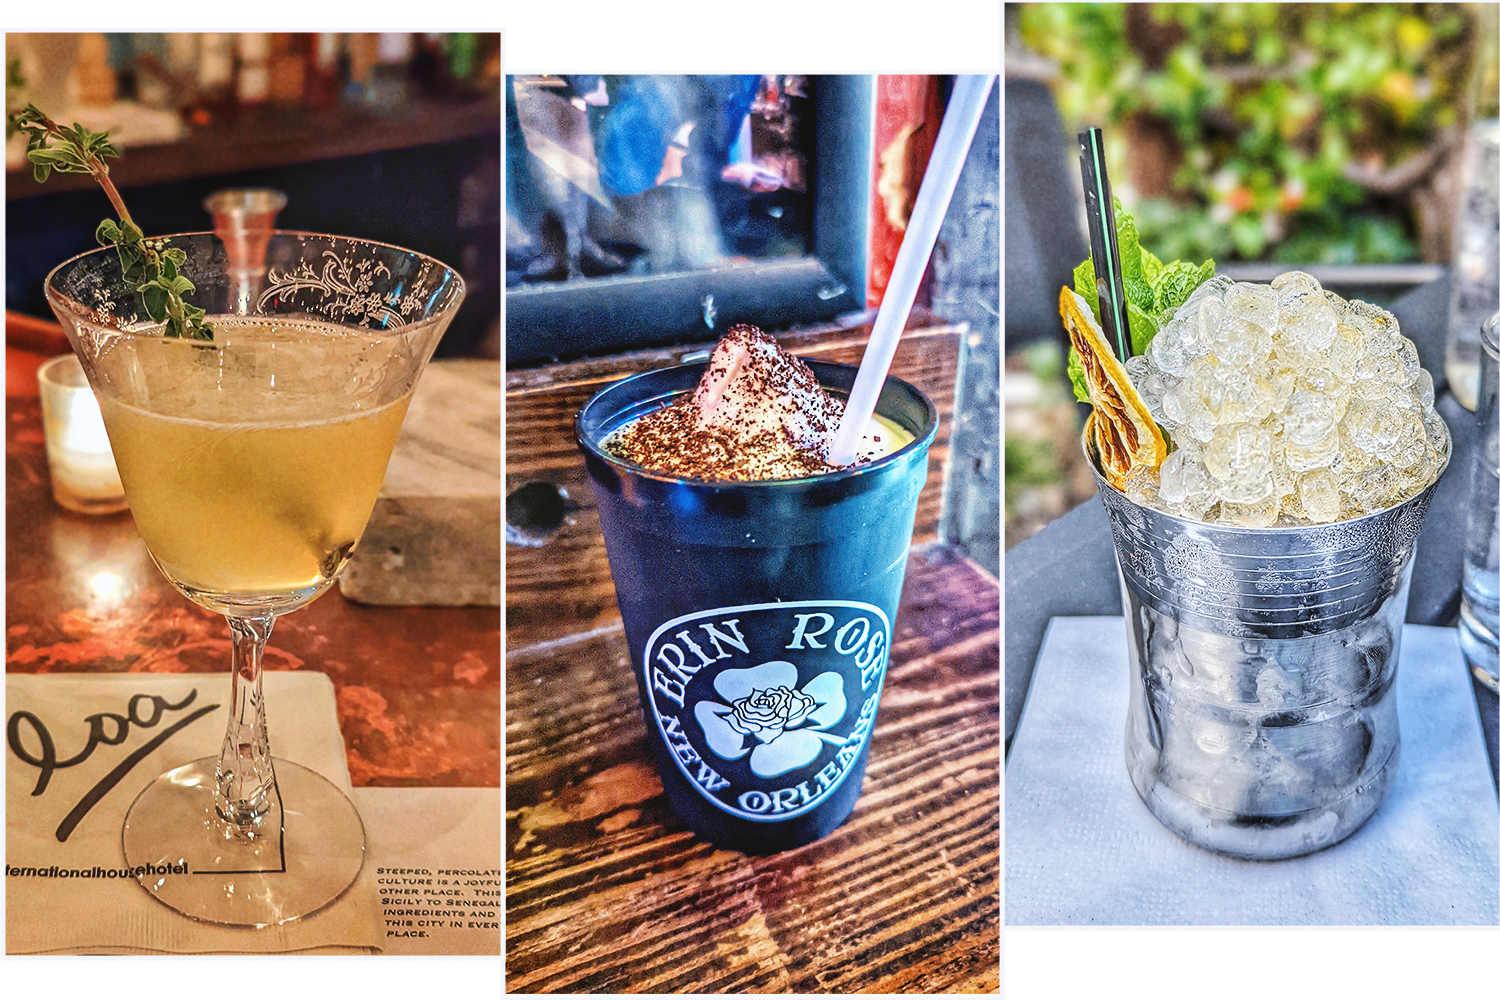 Cocktails in New Orleans: a drink at Loa, Frozen Irish Coffee at Erin Rose and Catacomb at Cure